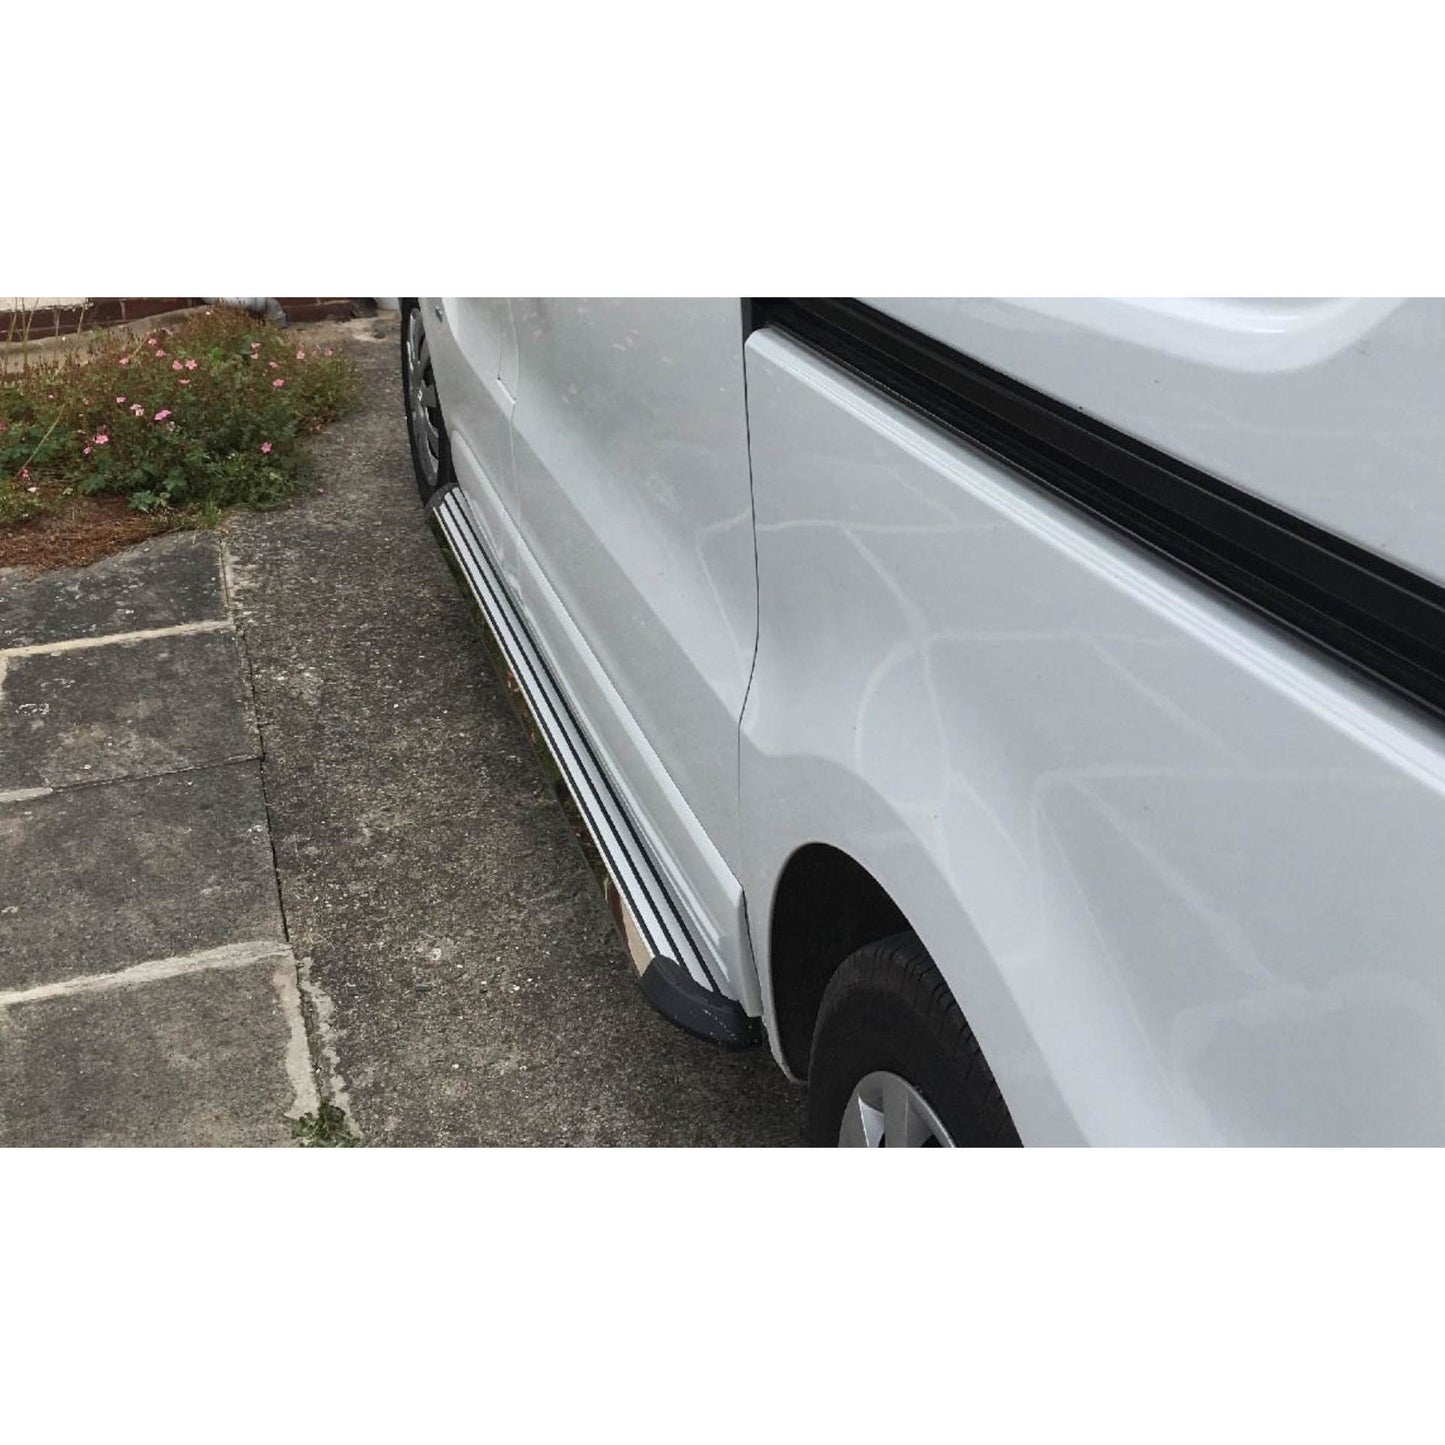 Stingray Side Steps Running Boards for Vauxhall Opel Vivaro SWB 2014-2018 -  - sold by Direct4x4